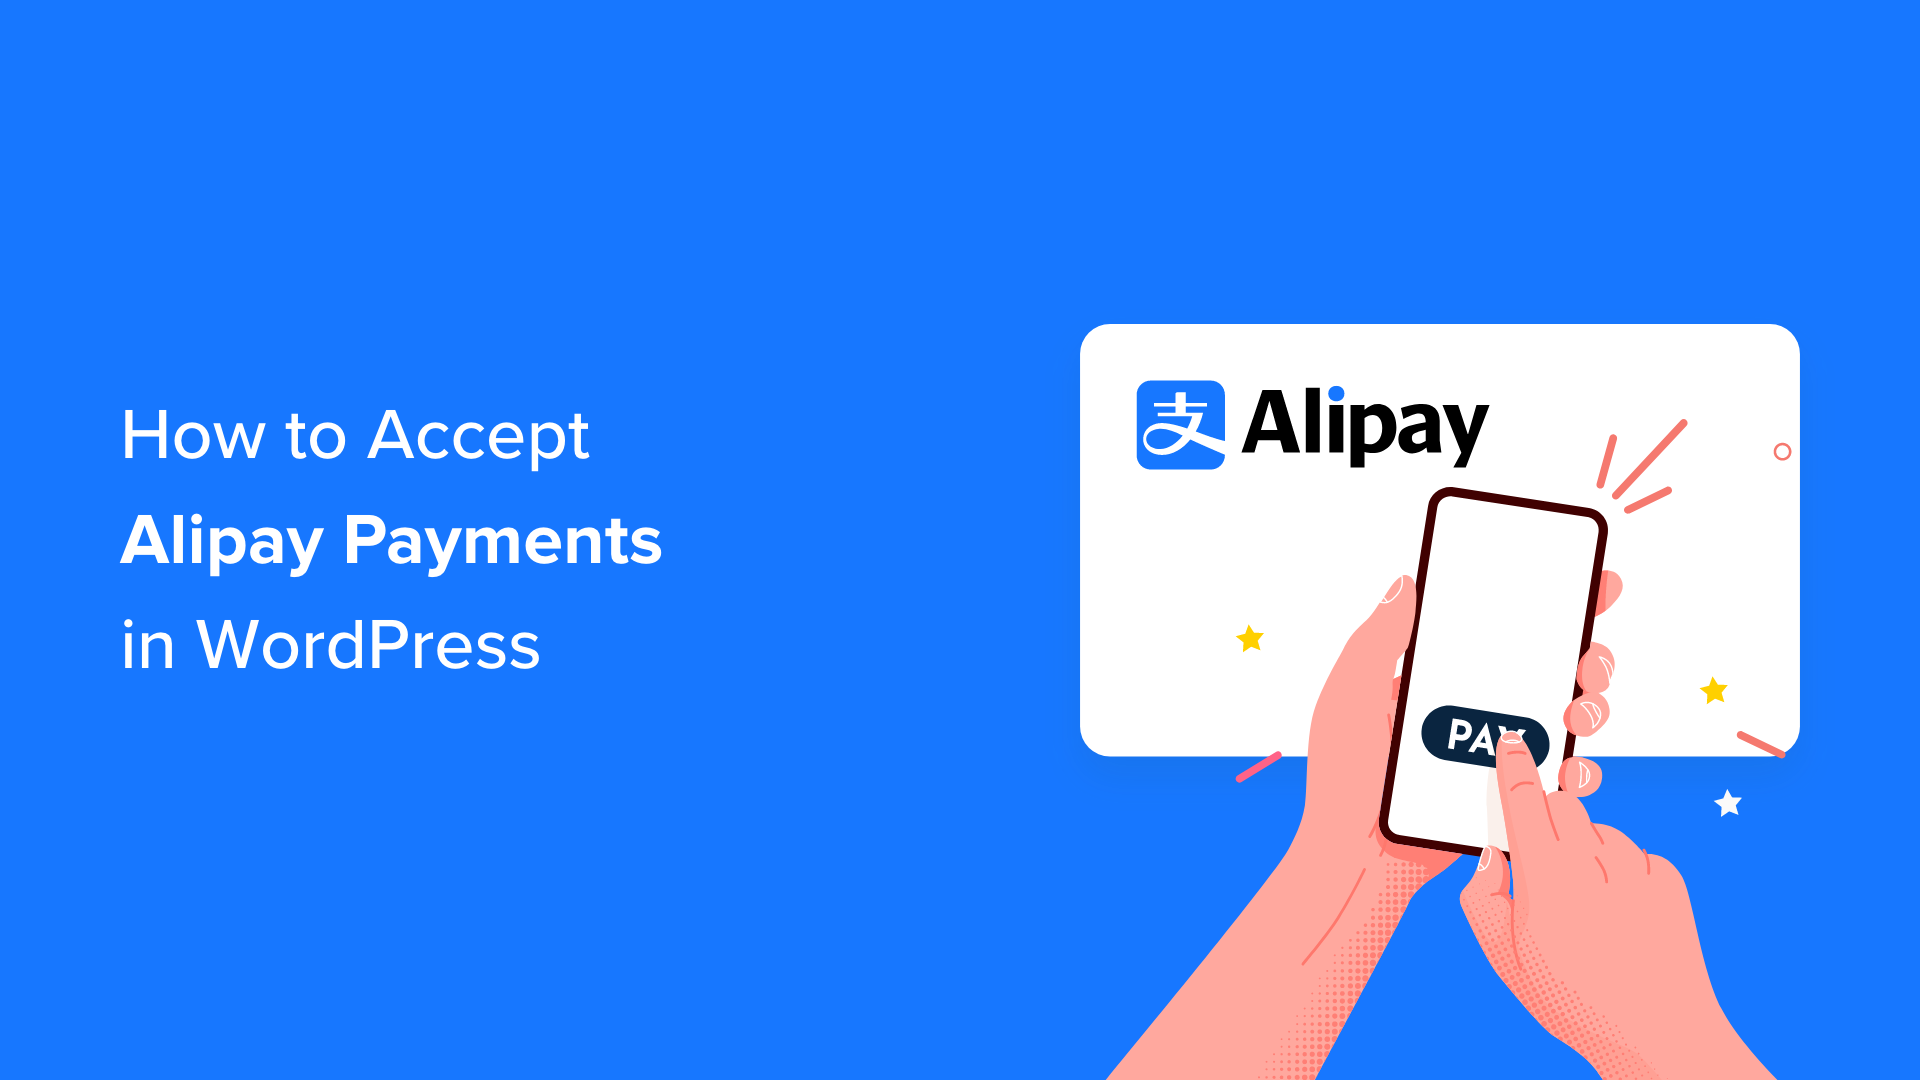 PayPal Alternative Payment Methods Agreement